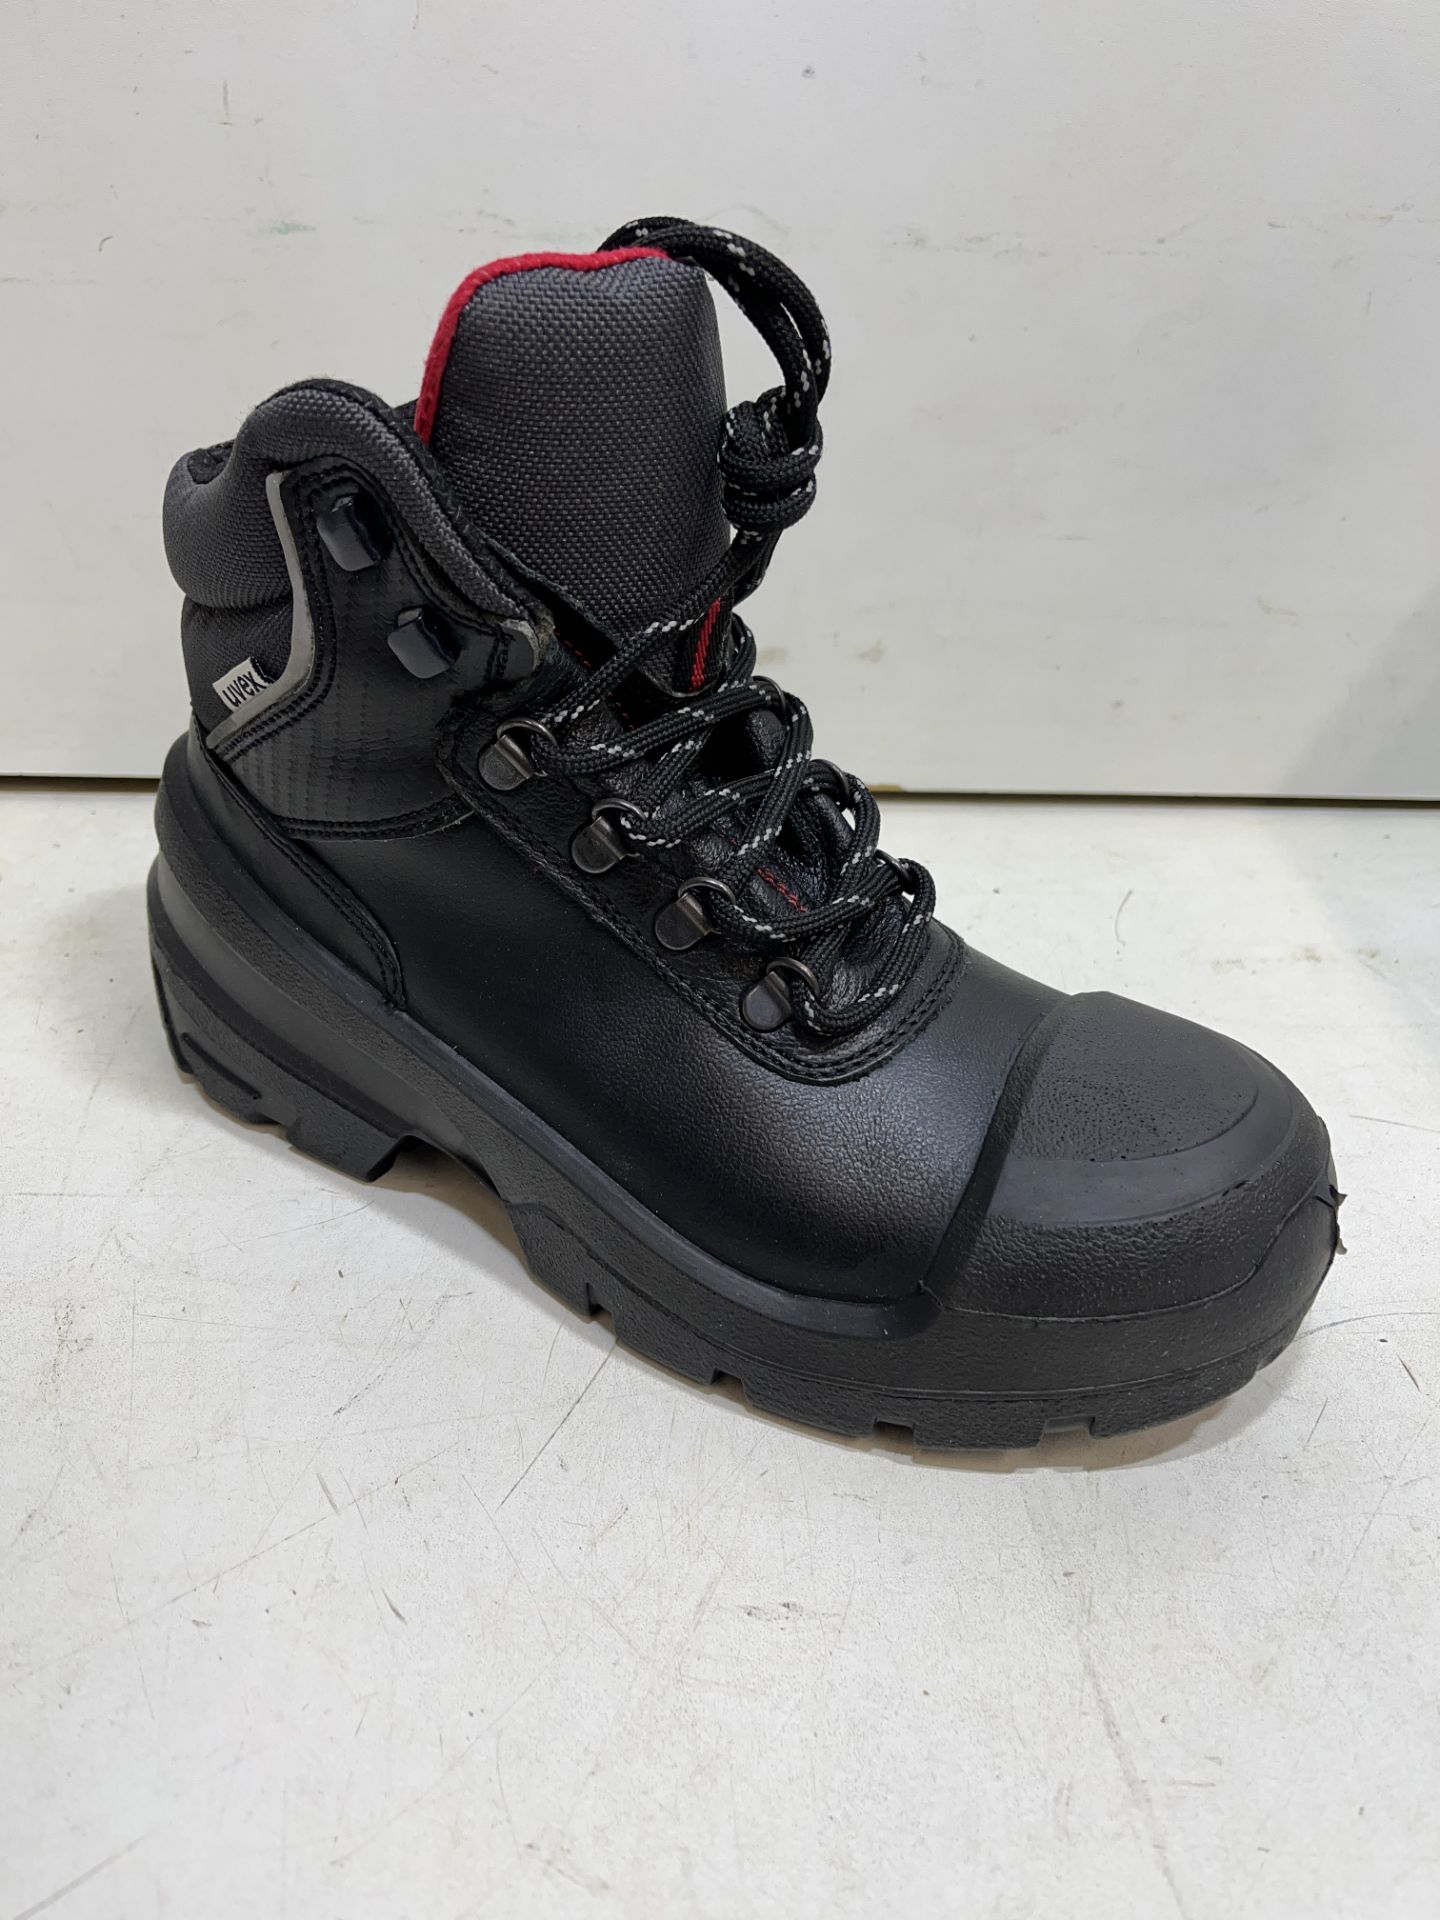 Uvex Safety Boots | UK 6